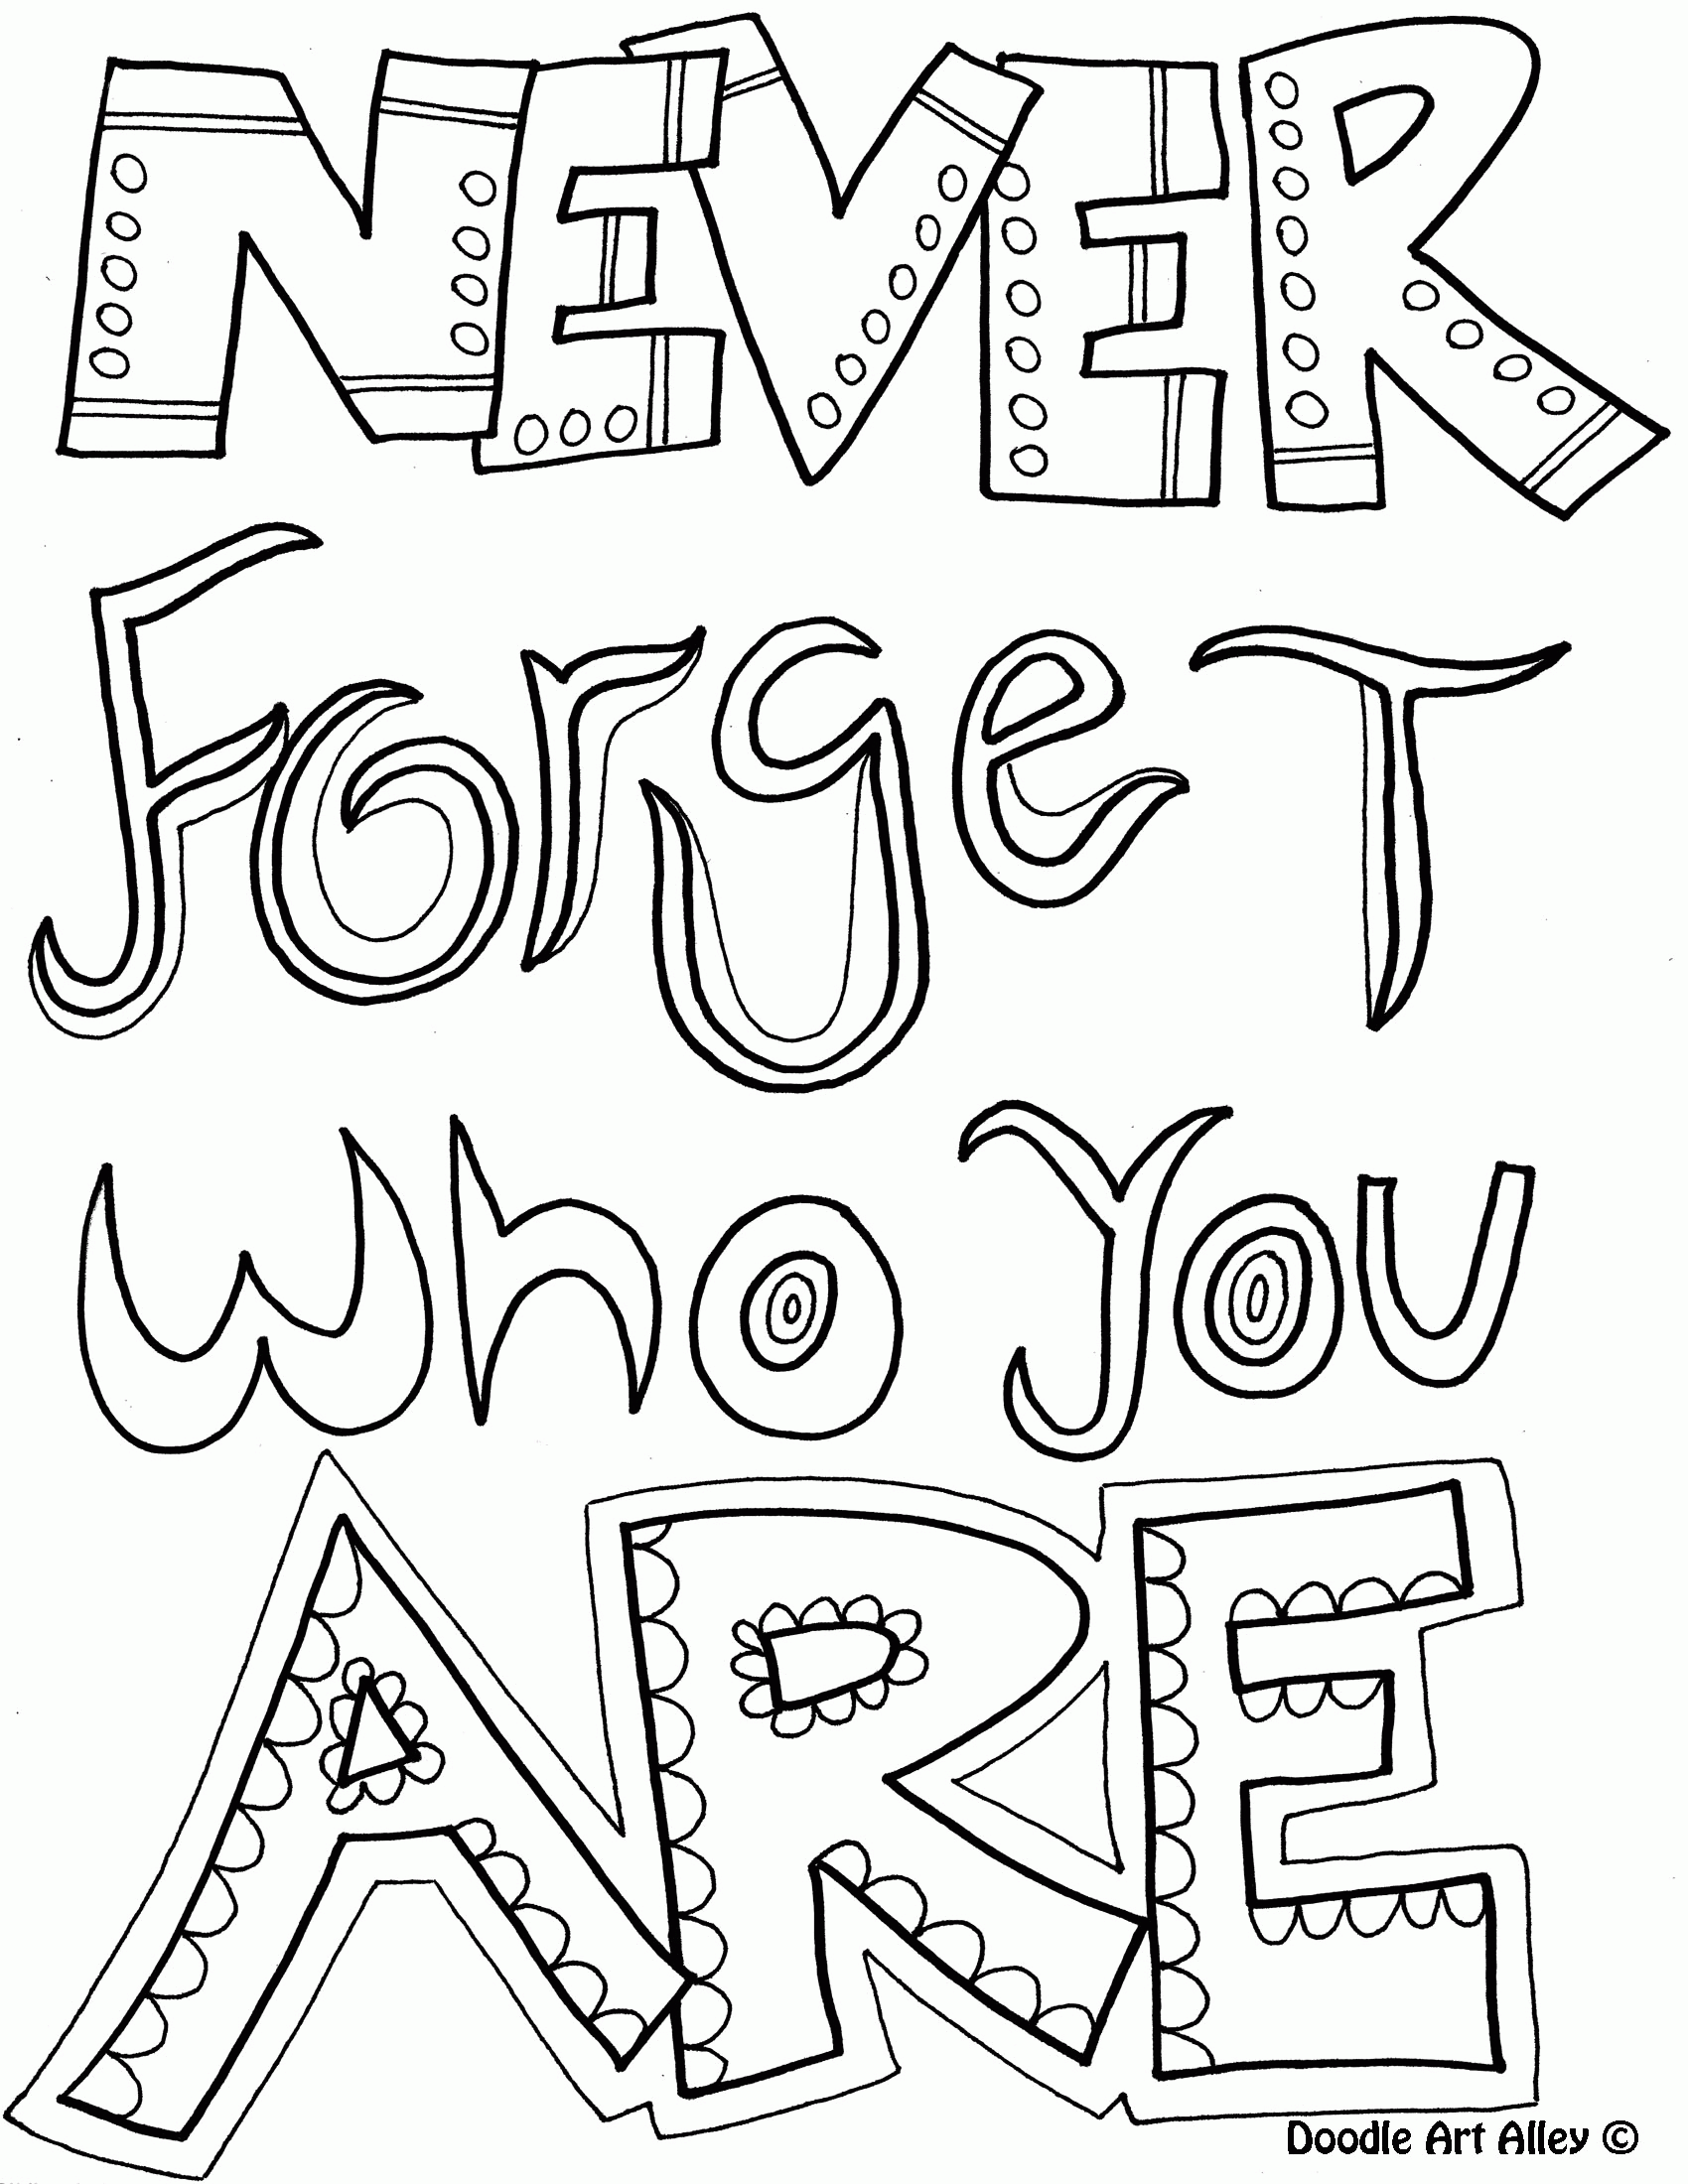 Quote Coloring Pages Printable - Coloring Home